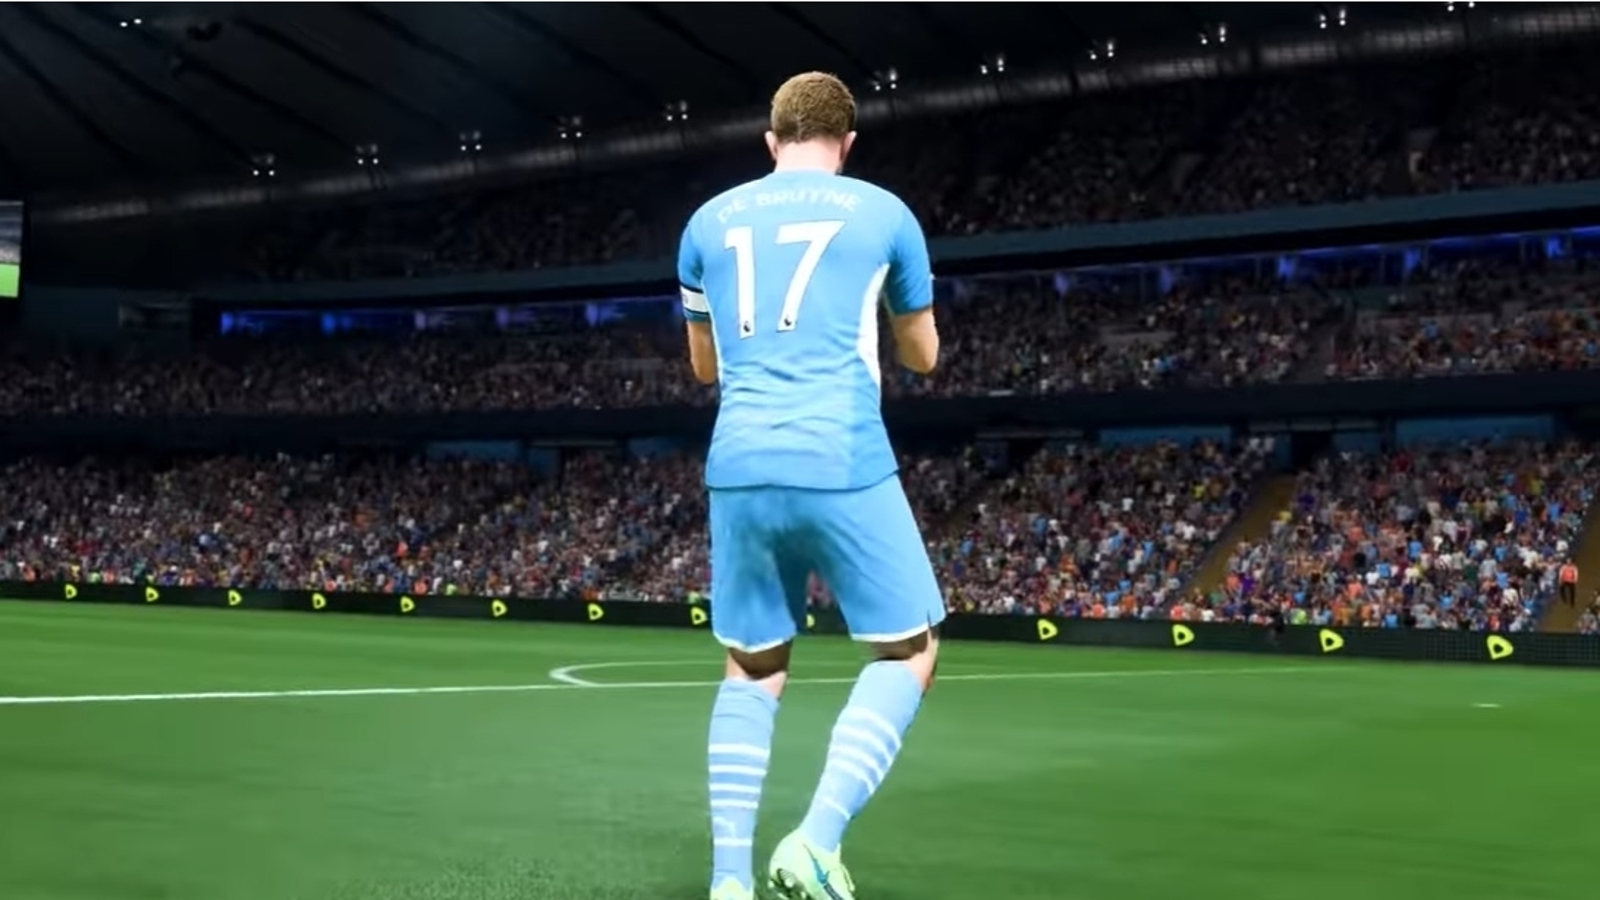 Will FIFA 22 Have A Last Gen Release For PS3 and Xbox 360?